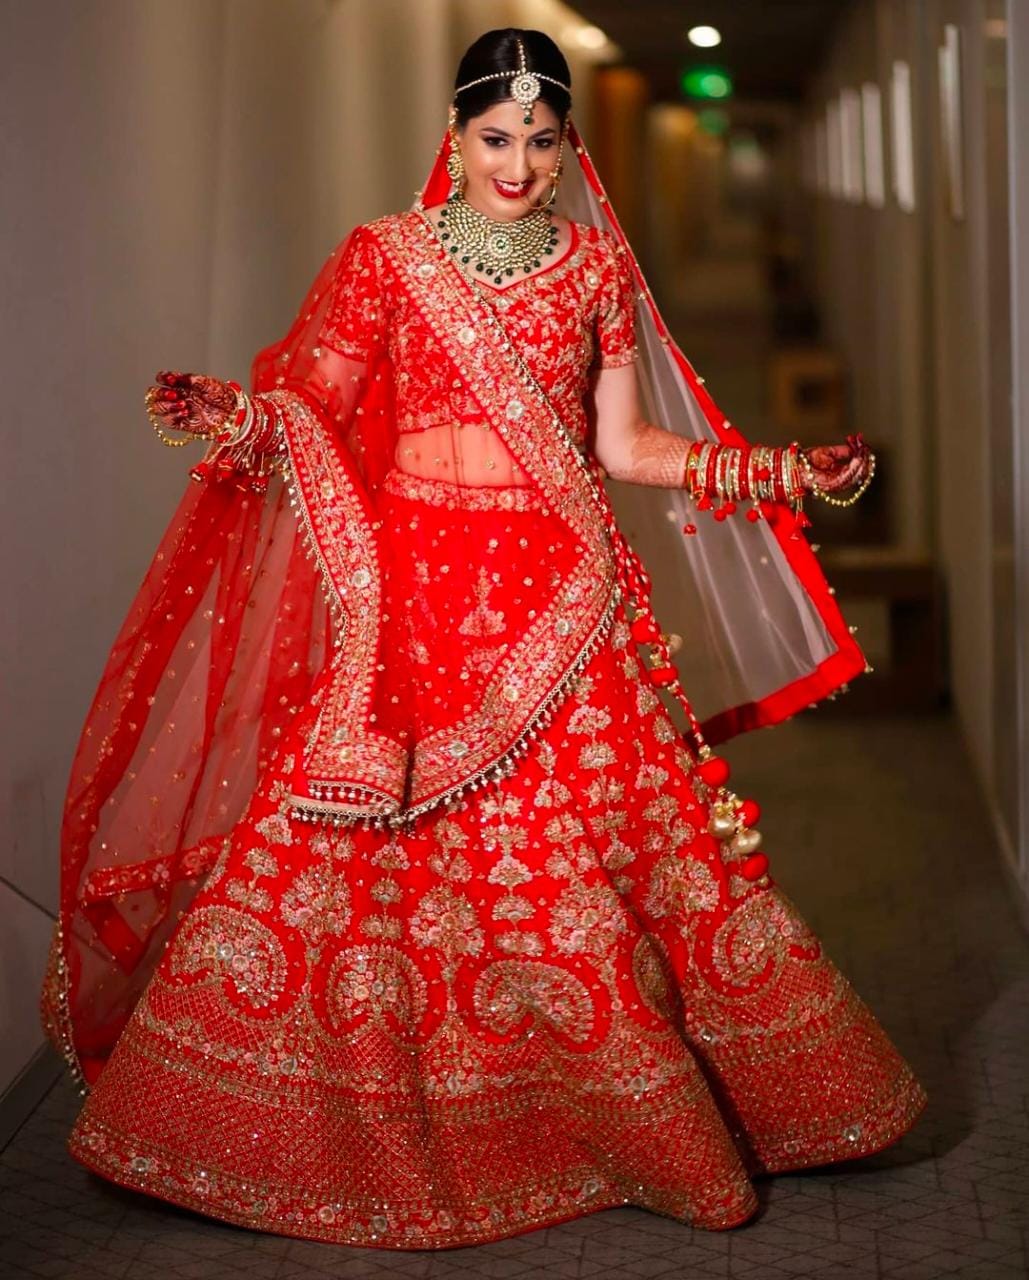 Rent The Most Gorgeous Bridal Lehengas & Party Attires From These 7 Places  In Delhi! | WhatsHot Delhi Ncr